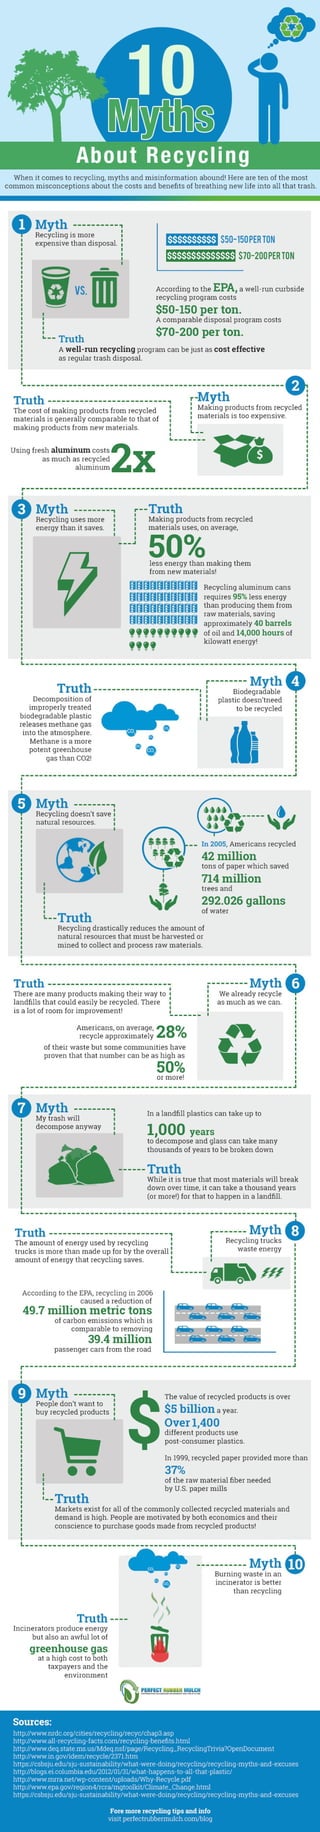 Recycling Myths Infographic